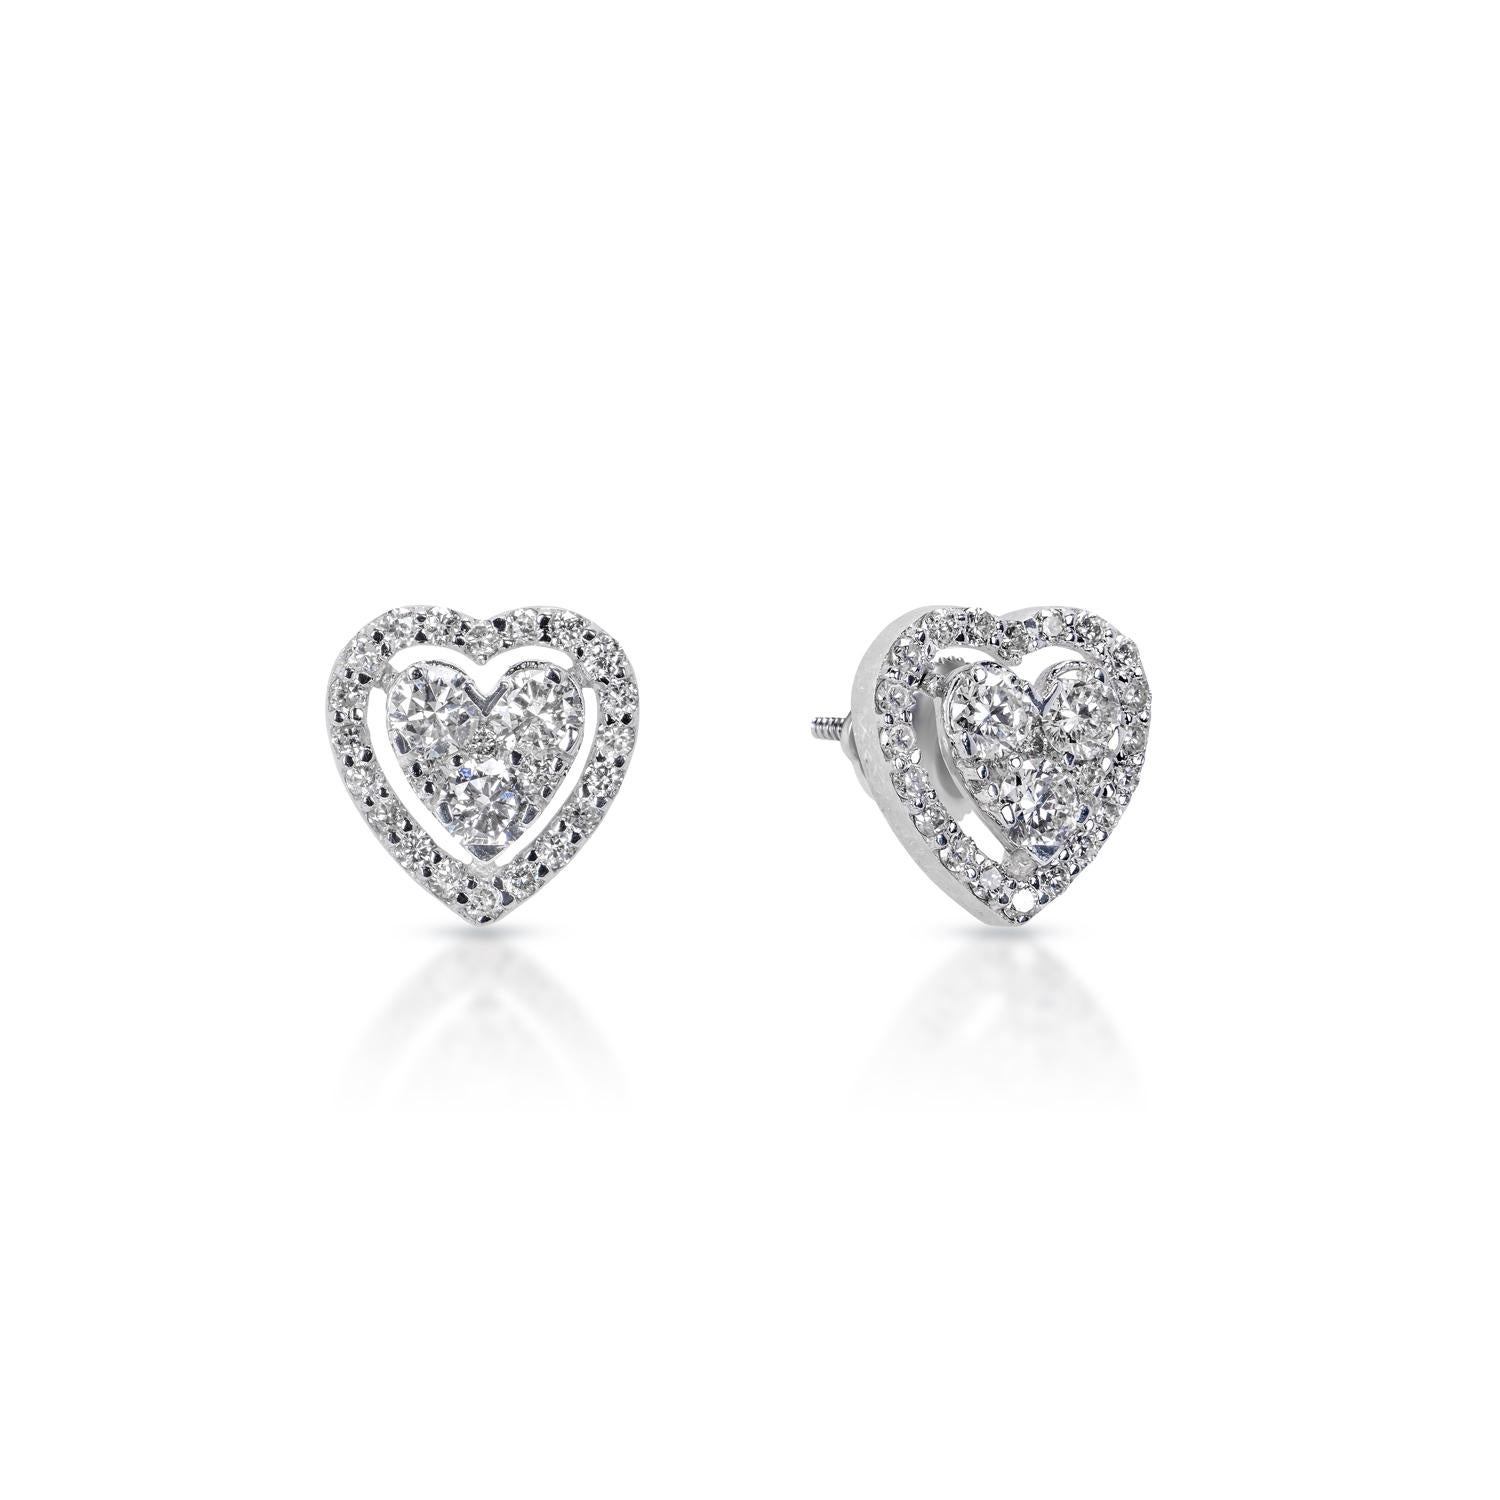 Round Cut 0.76 Carat Hear Shaped Round Brilliant Heart Diamond Stud Earrings Certified For Sale